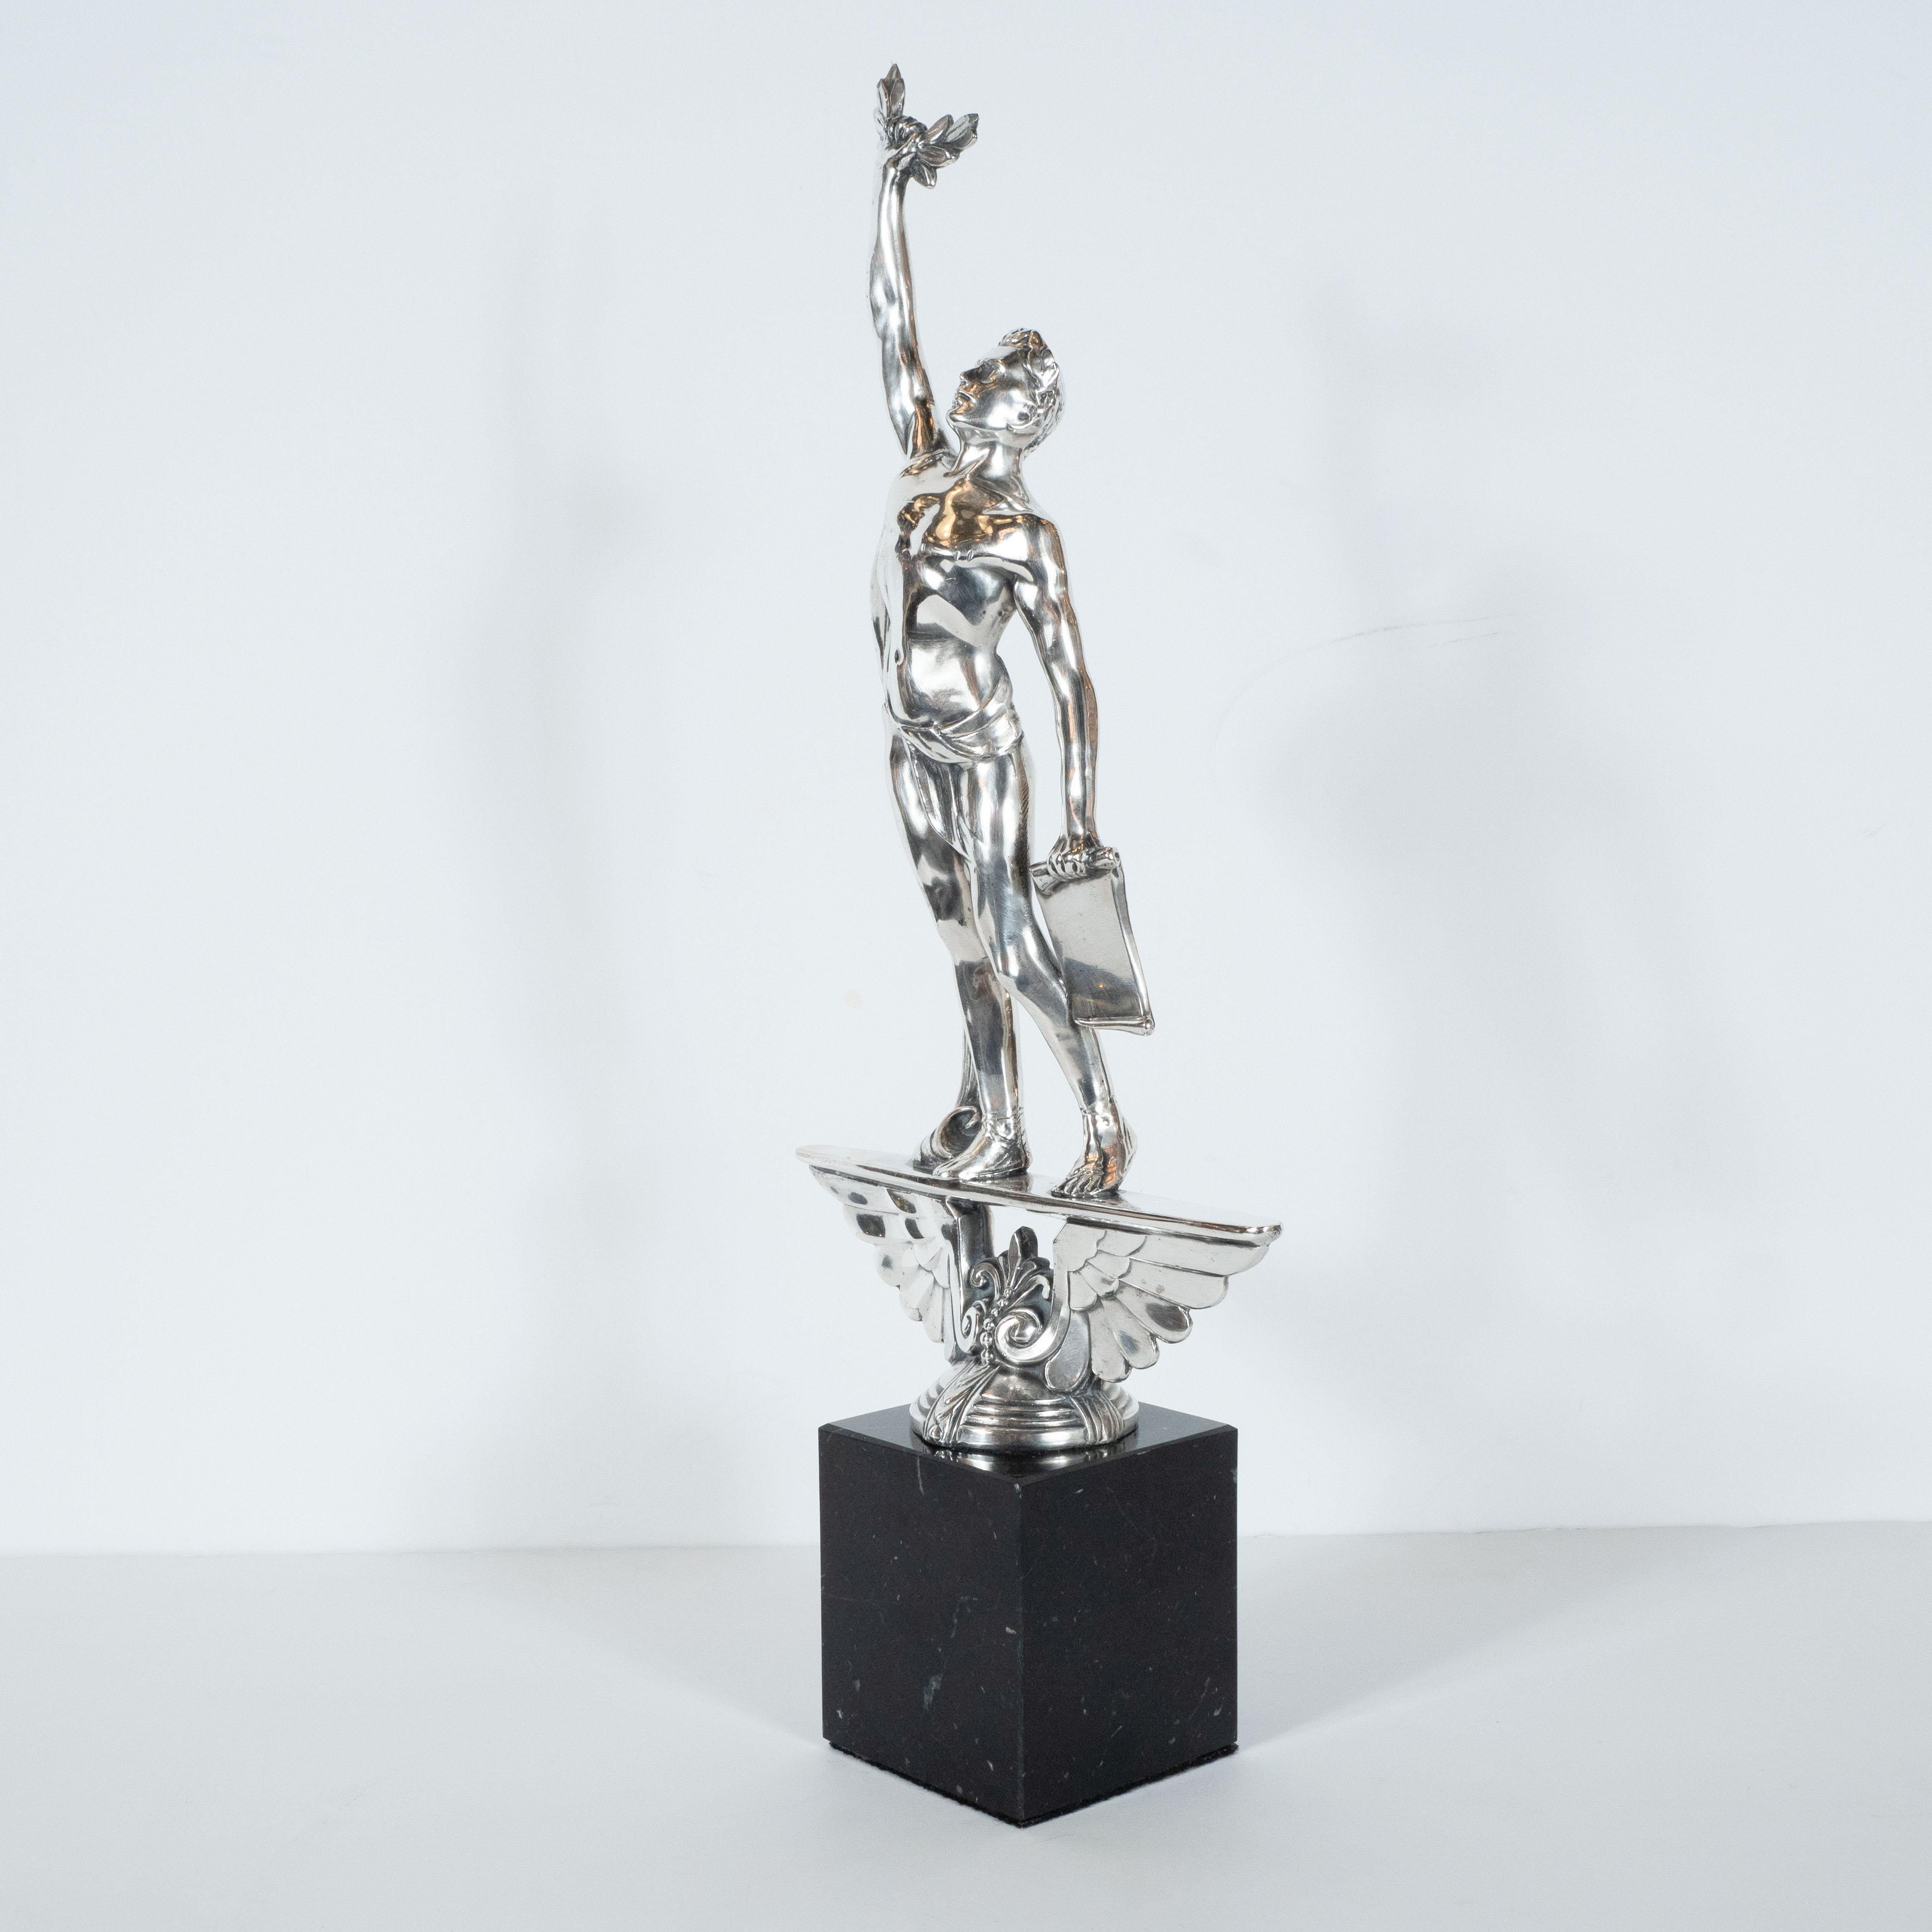 Art Deco Classical Figurative Silvered Sculpture with Wing and Acanthus Motifs 3